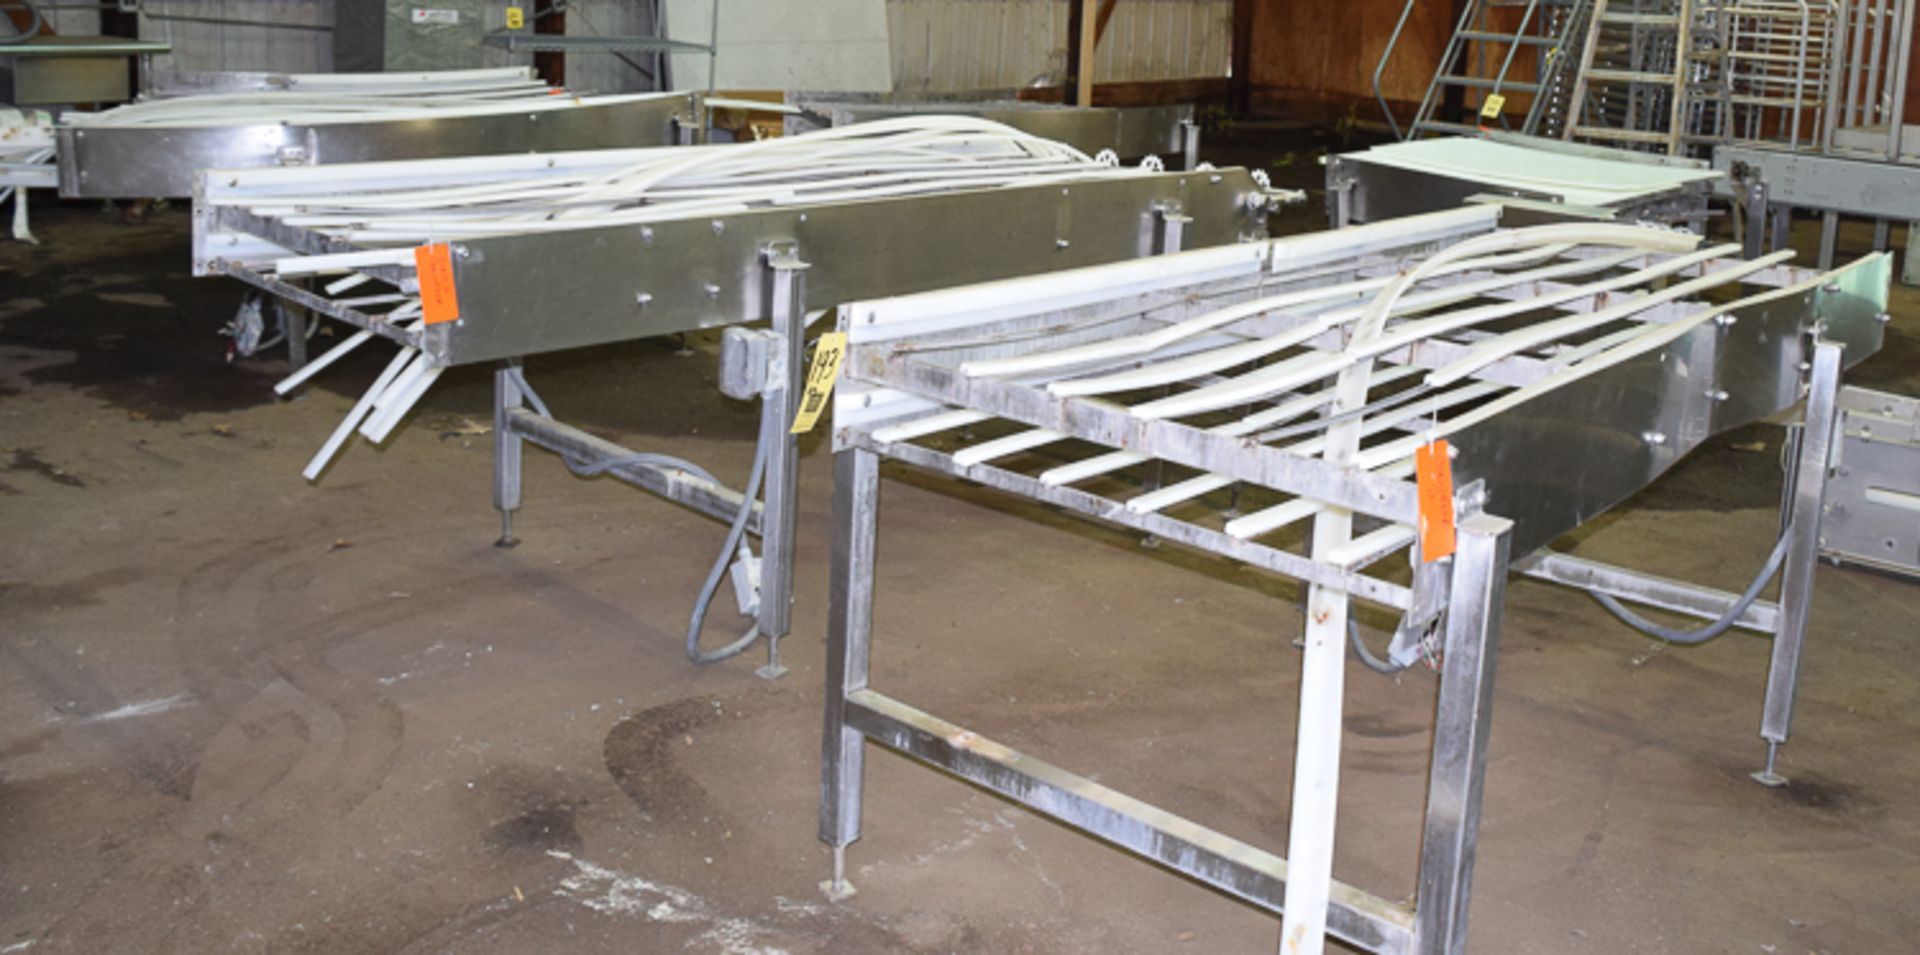 6-Sections S/S Frame Product Conveyor, Rigging Fee: Please Contact US Rigging 920-655-2767